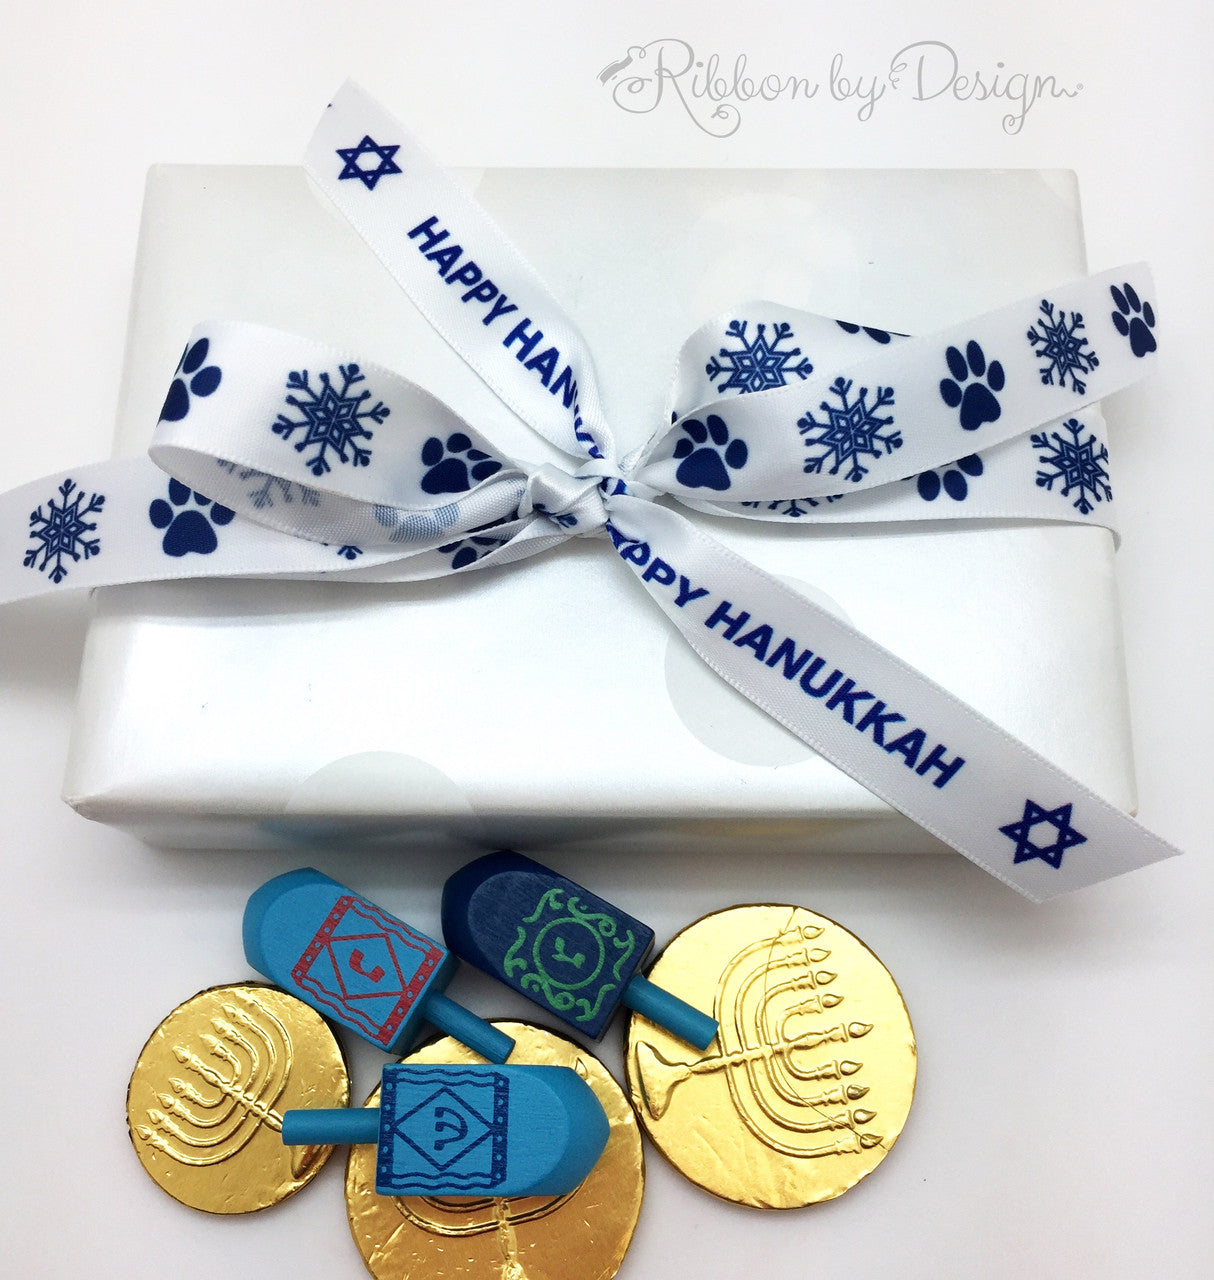 Paw prints ribbon with snowflakes in royal blue printed on 5/8"white single face satin